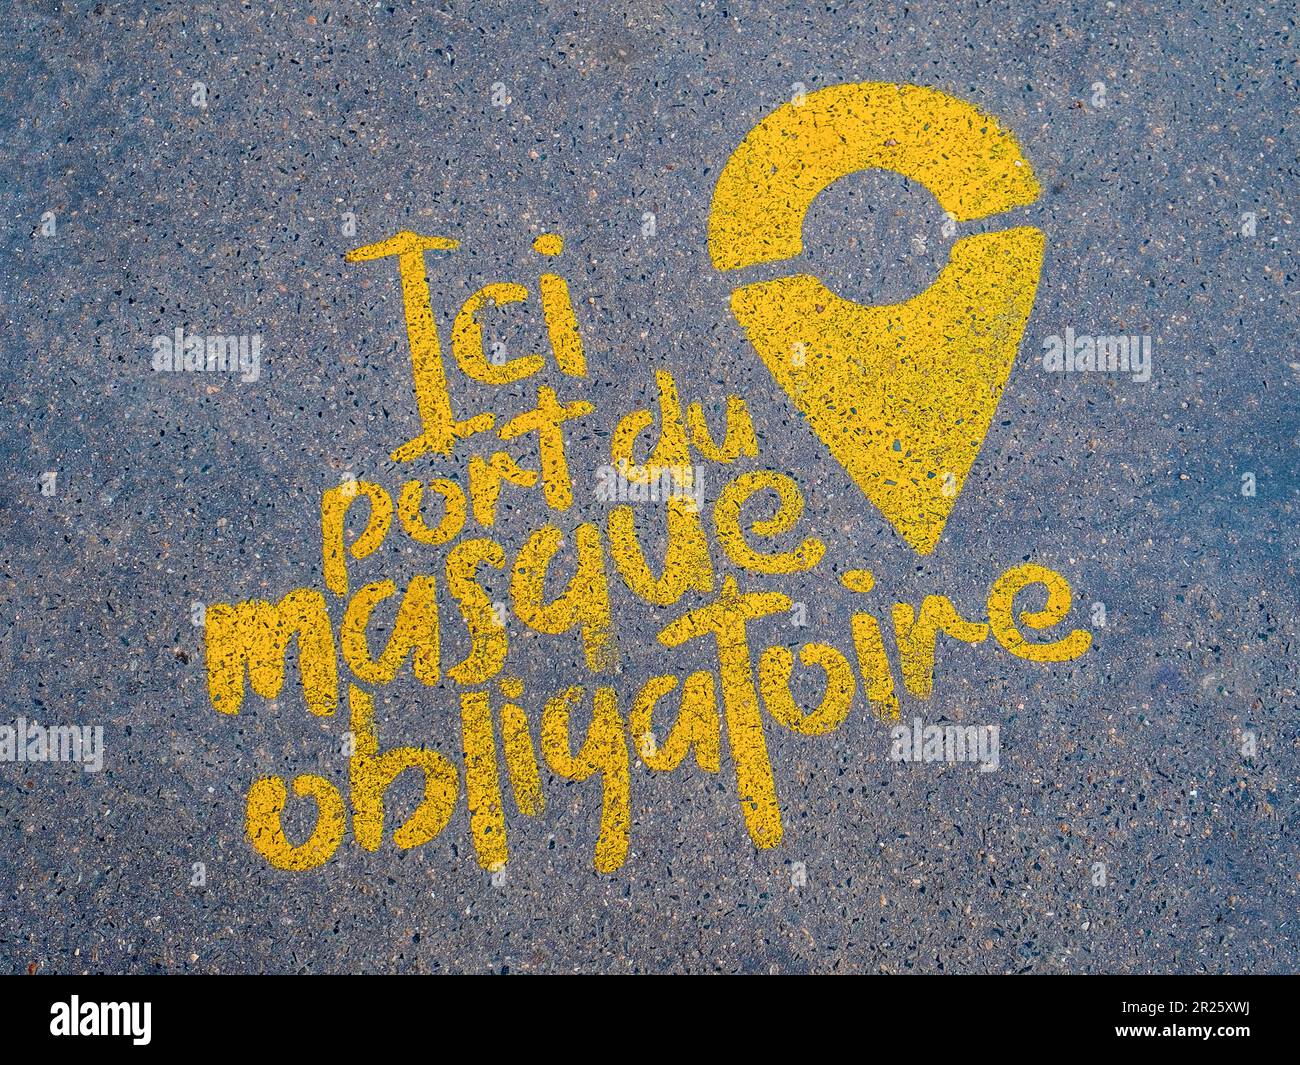 Spray painted stencil warning on pavement for wearing a mask during Covid pandemic - France. Stock Photo